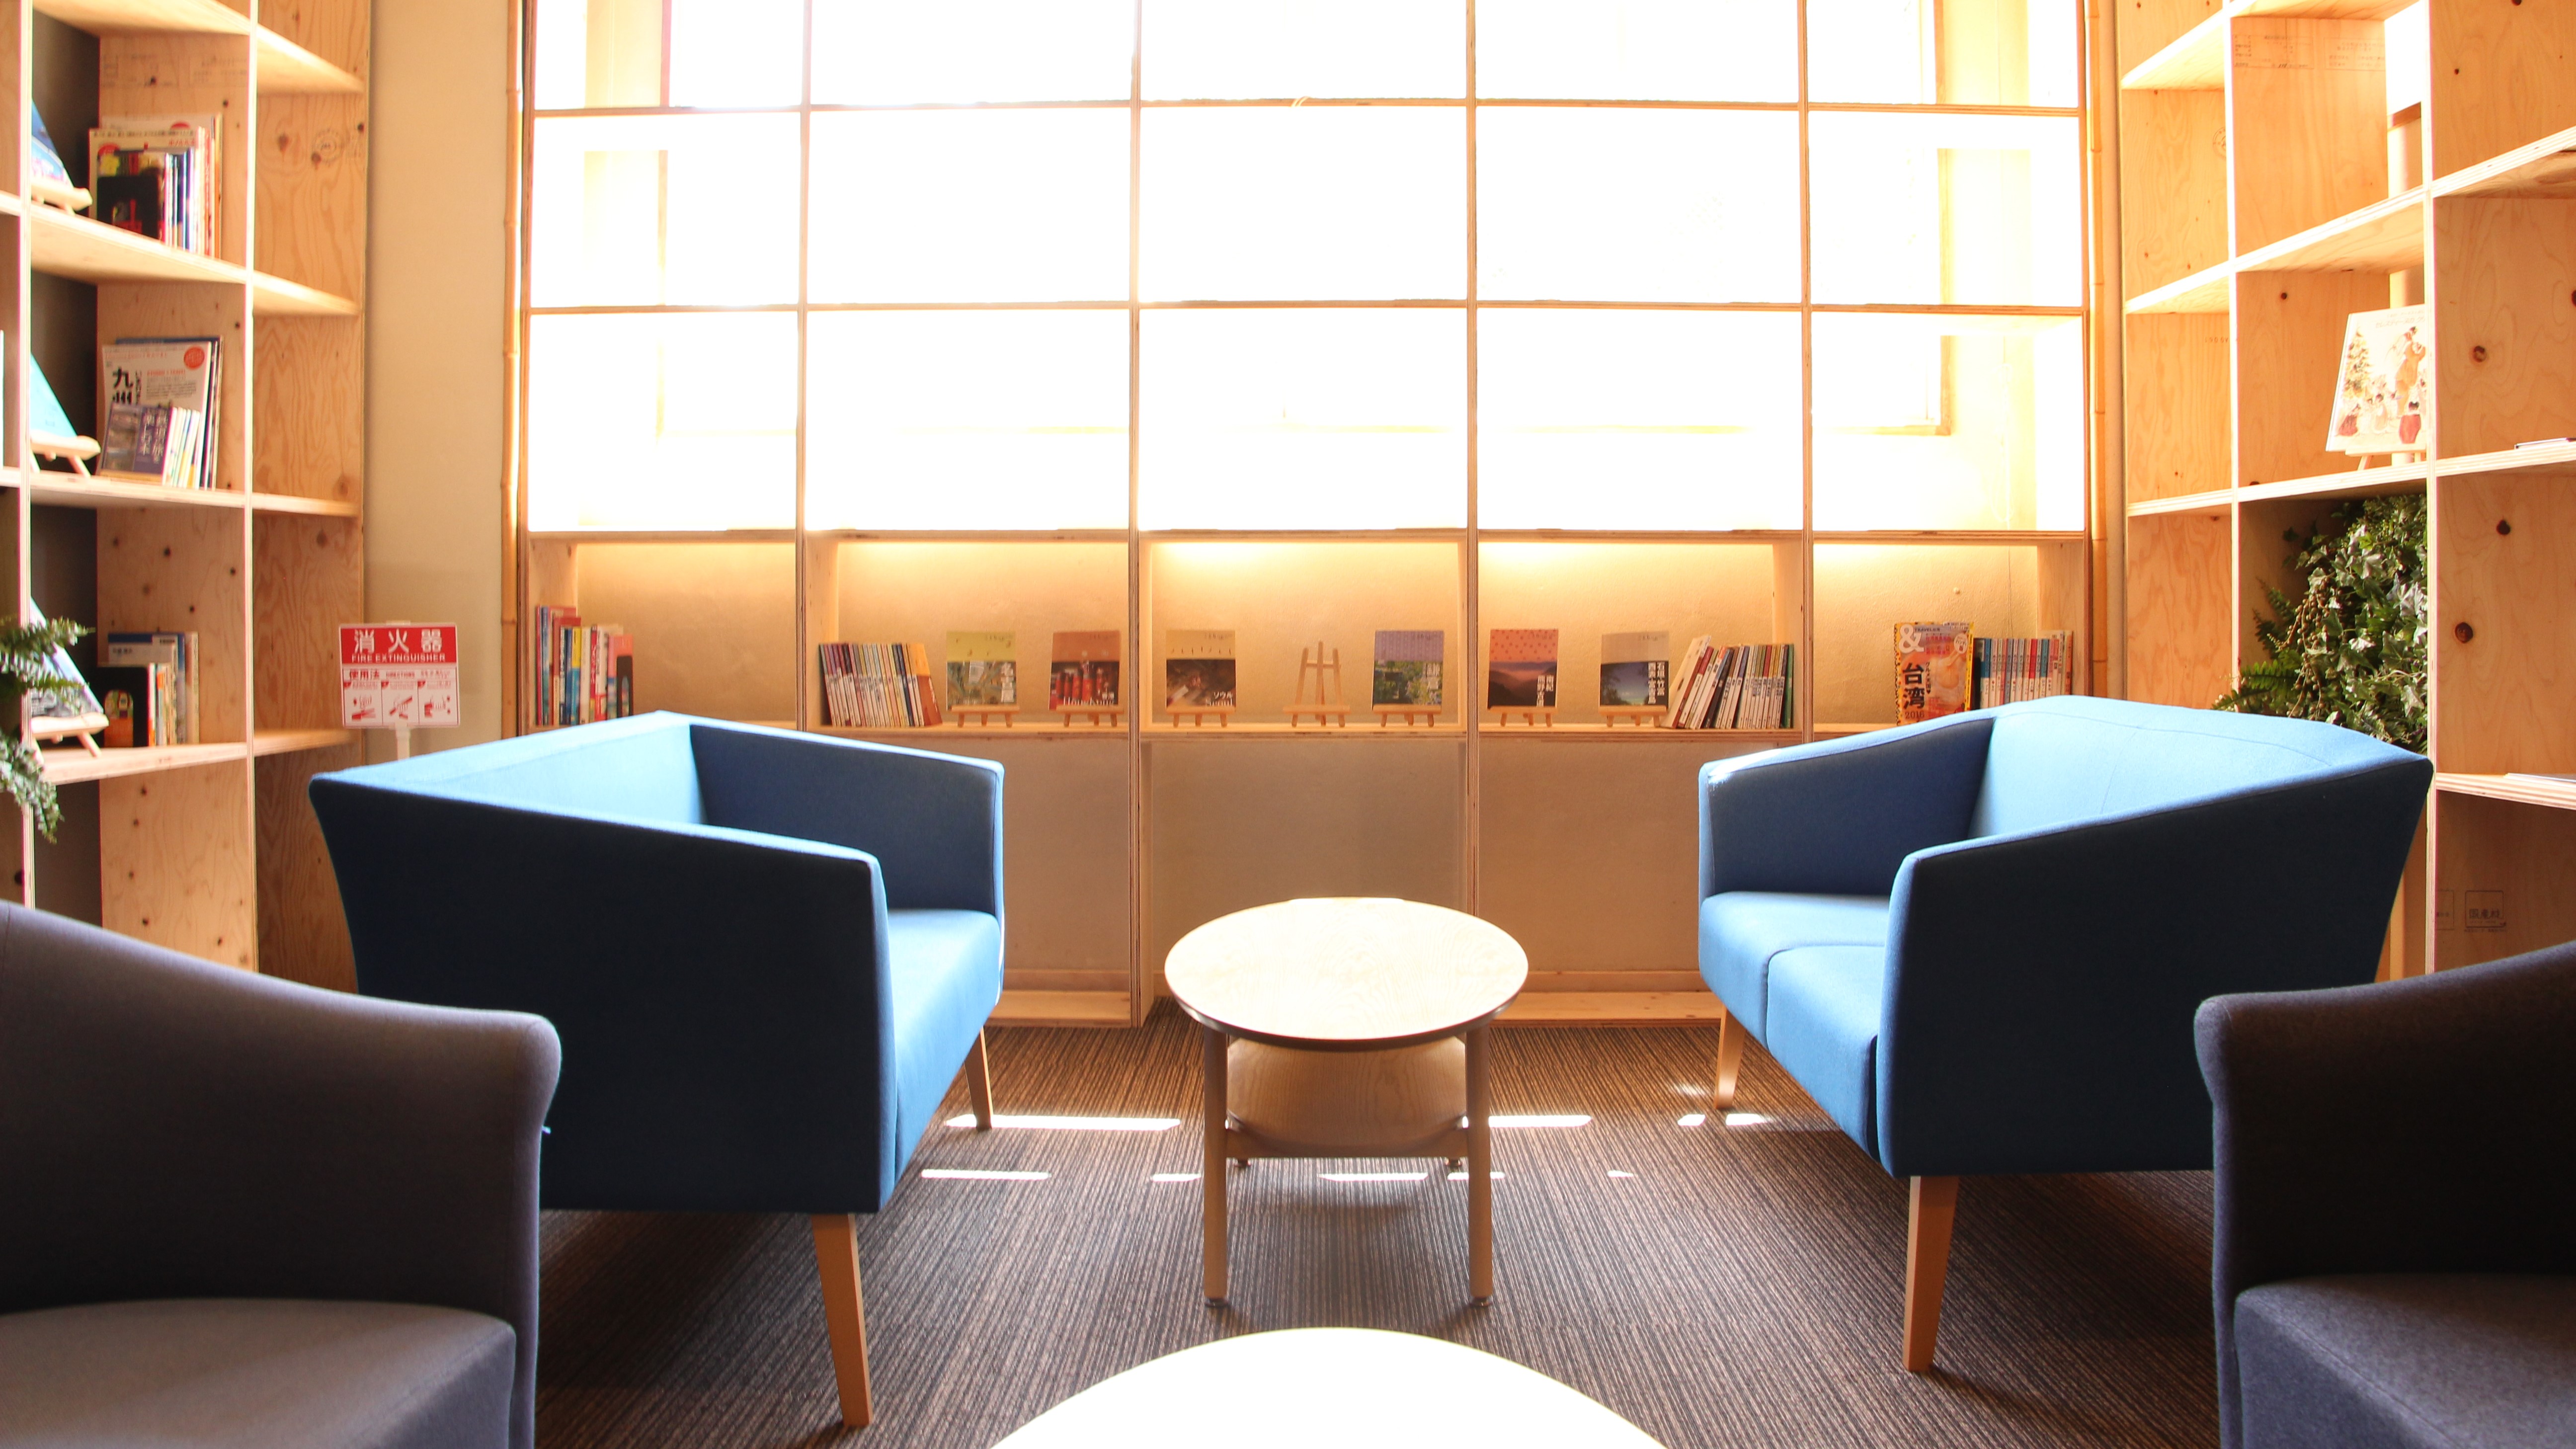 ◆Travel Book cafe＜2F＞